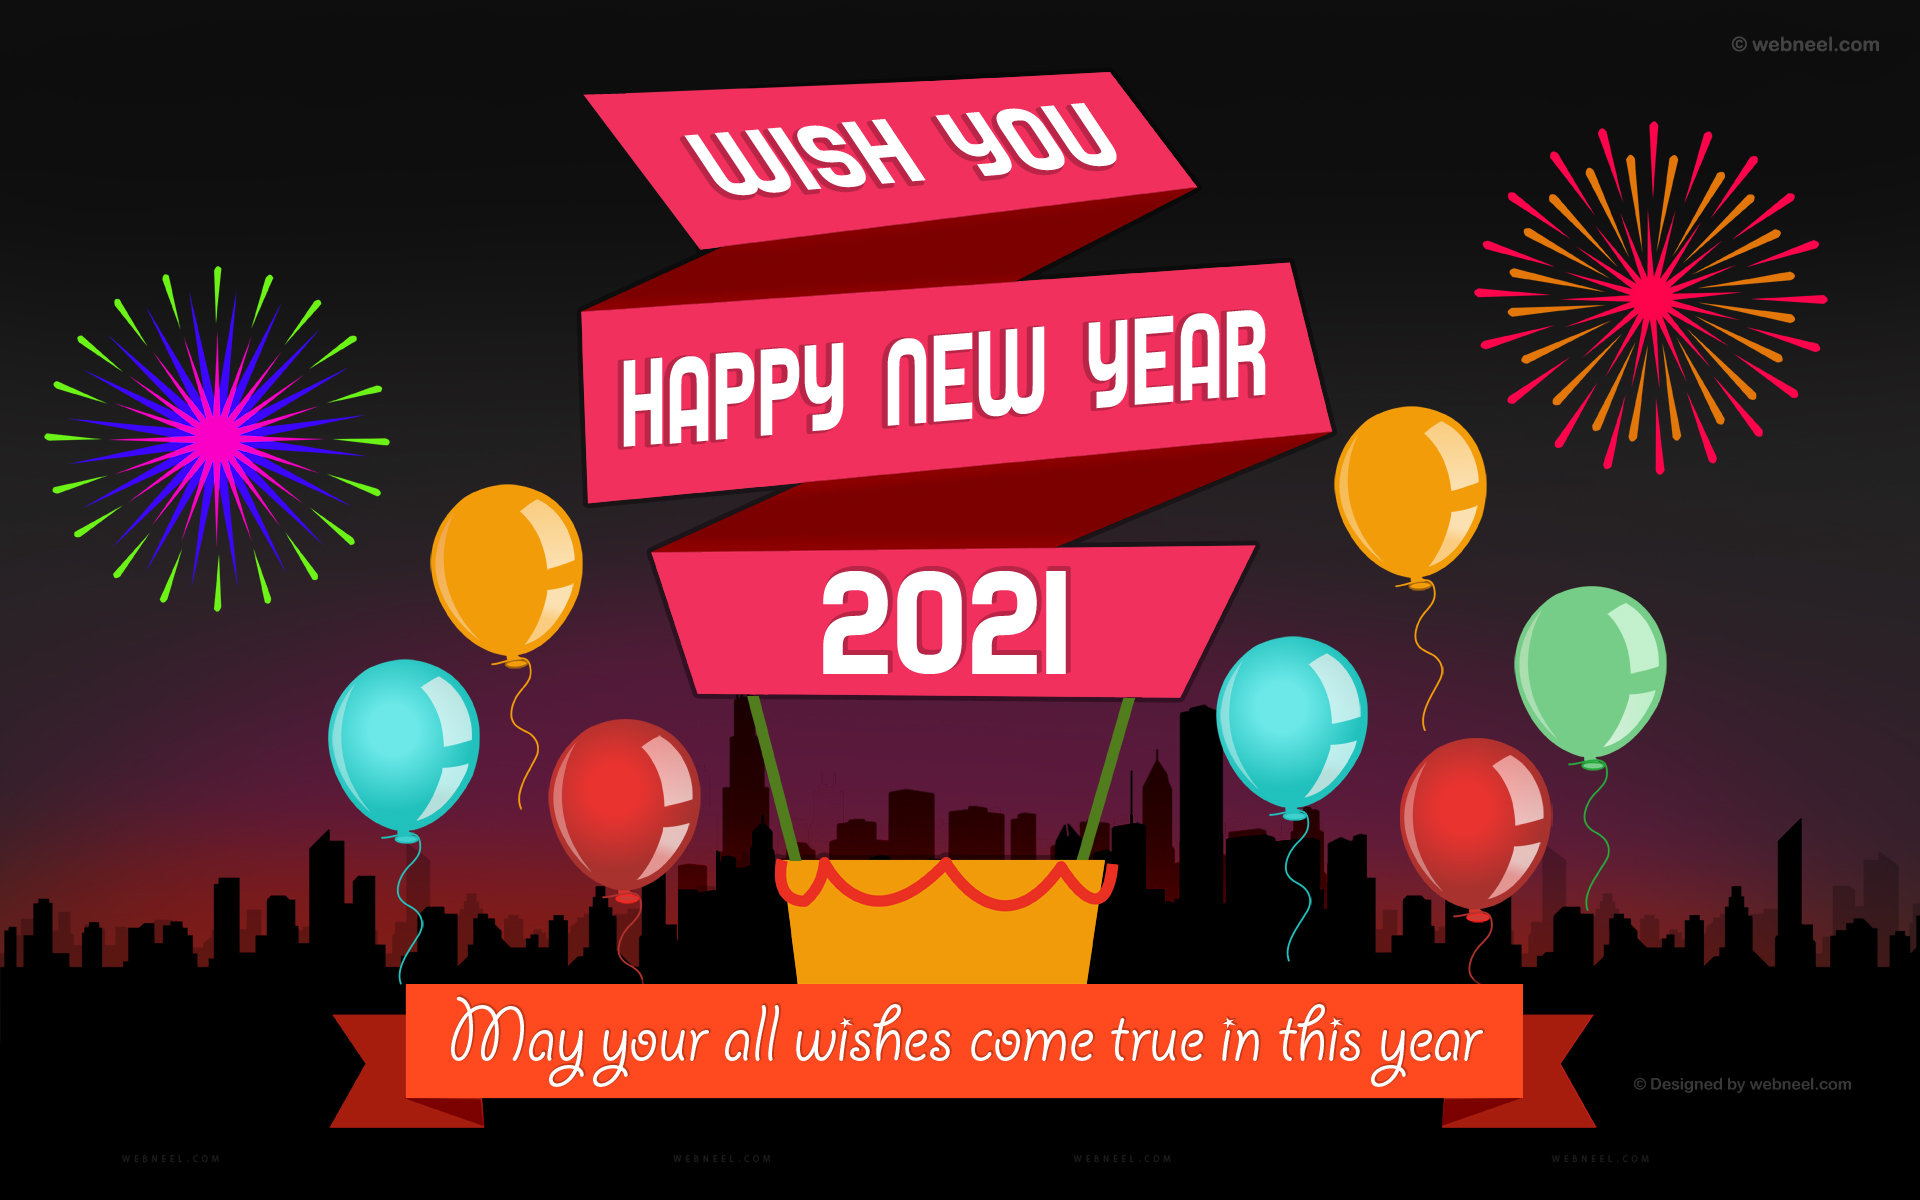 60 Beautiful 2020 New Year Wallpapers For Your Desktop